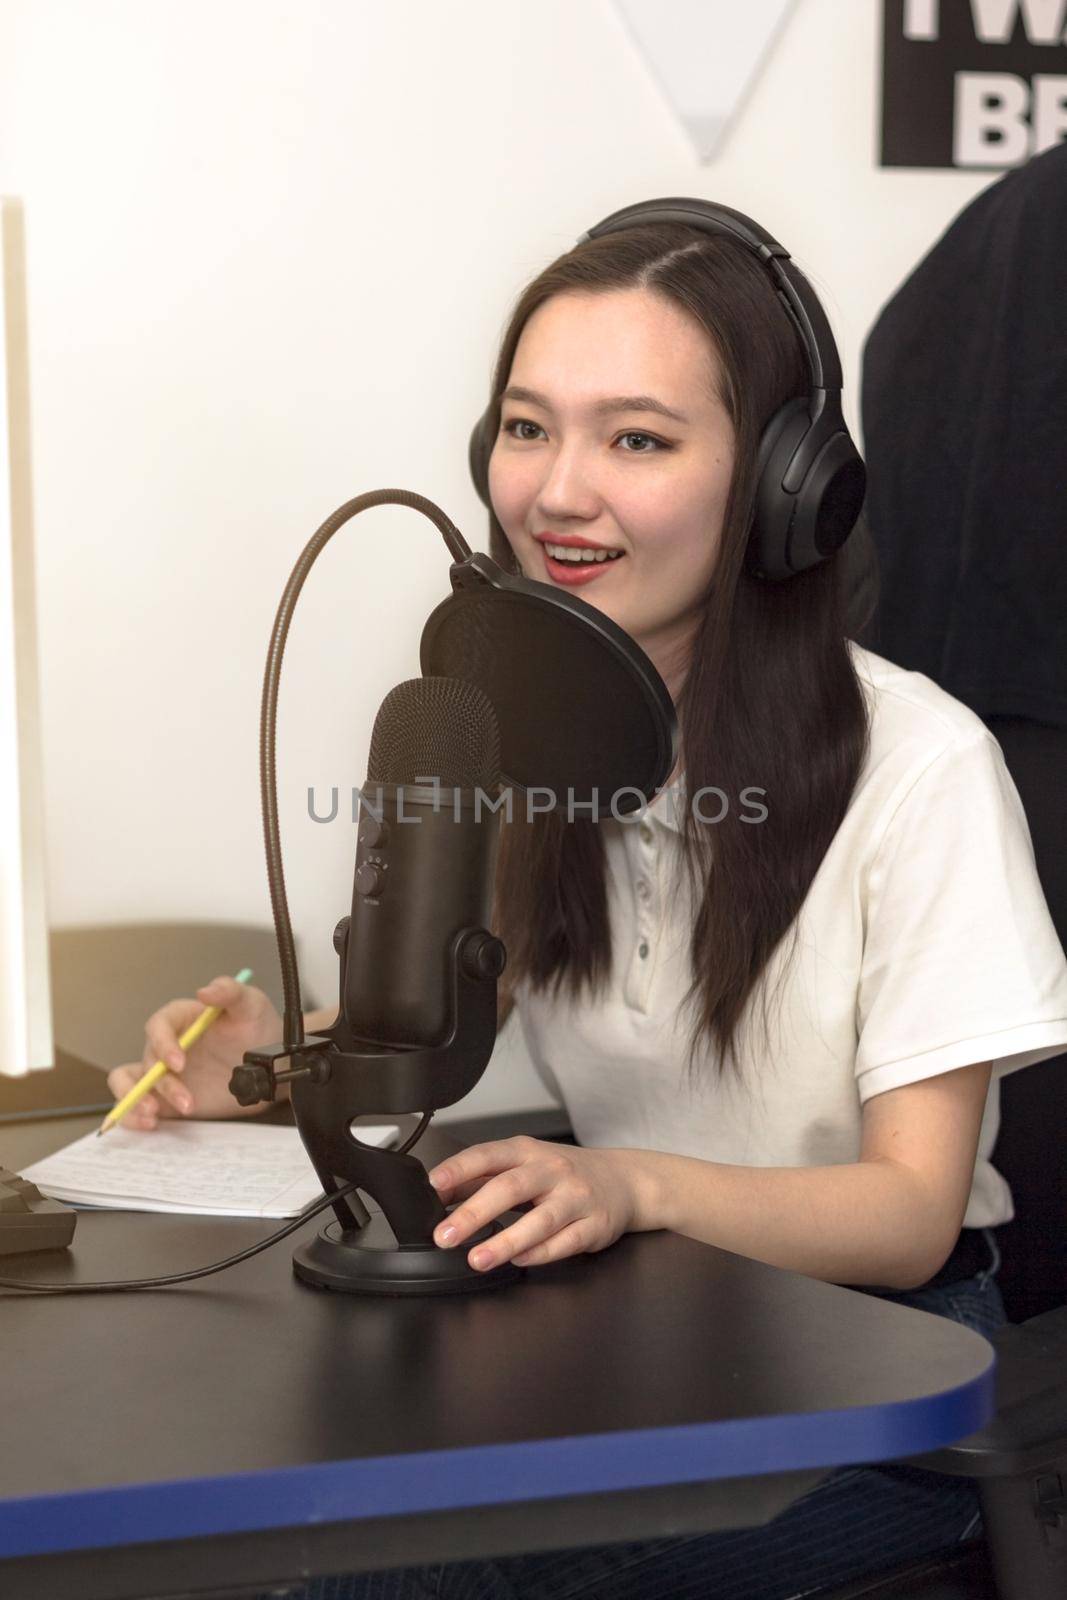 Young smiling woman with microphone and headphones recording podcast at studio, professional record audio, technology and media concept, vertical image